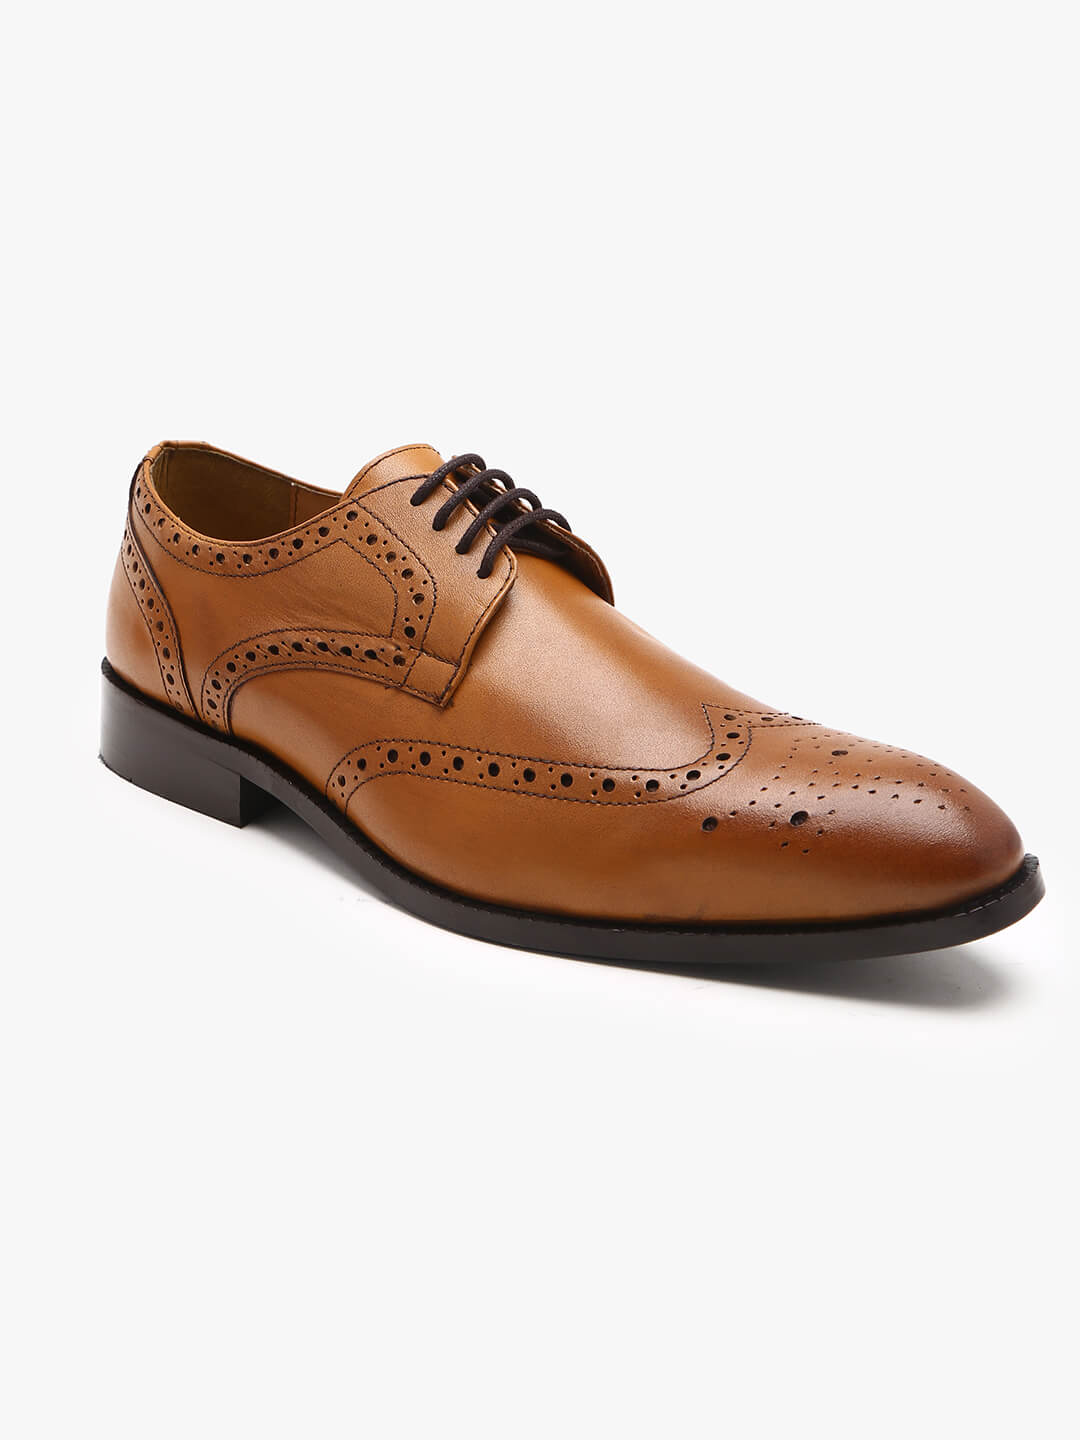 Buy Genuine Leather Tan Derby Brogues Shoes Online